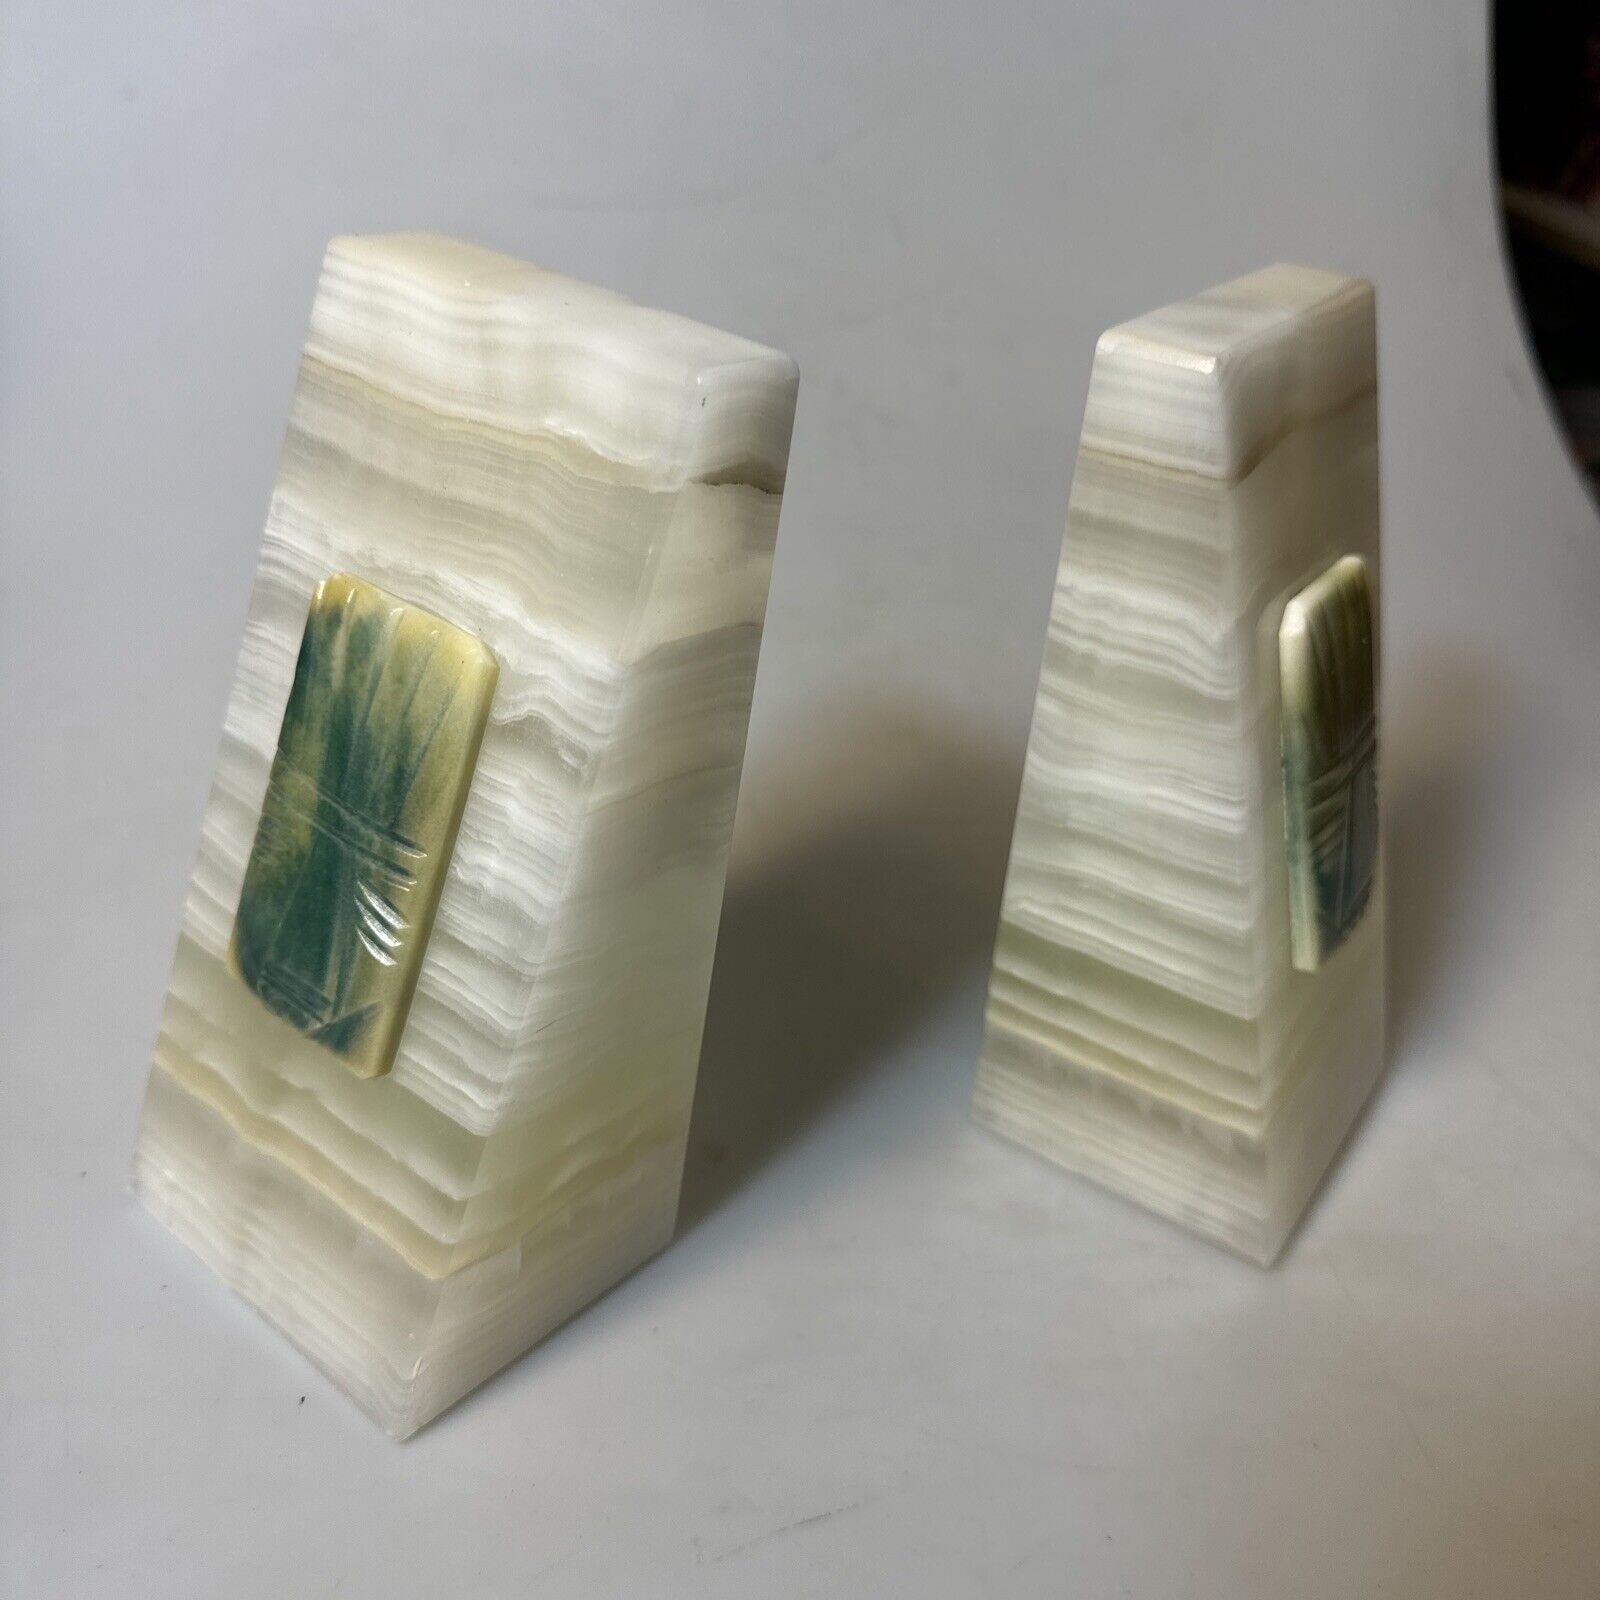 Vintage 60s banded onyx stone pair bookends Mayan green medallion emblems 6.5”